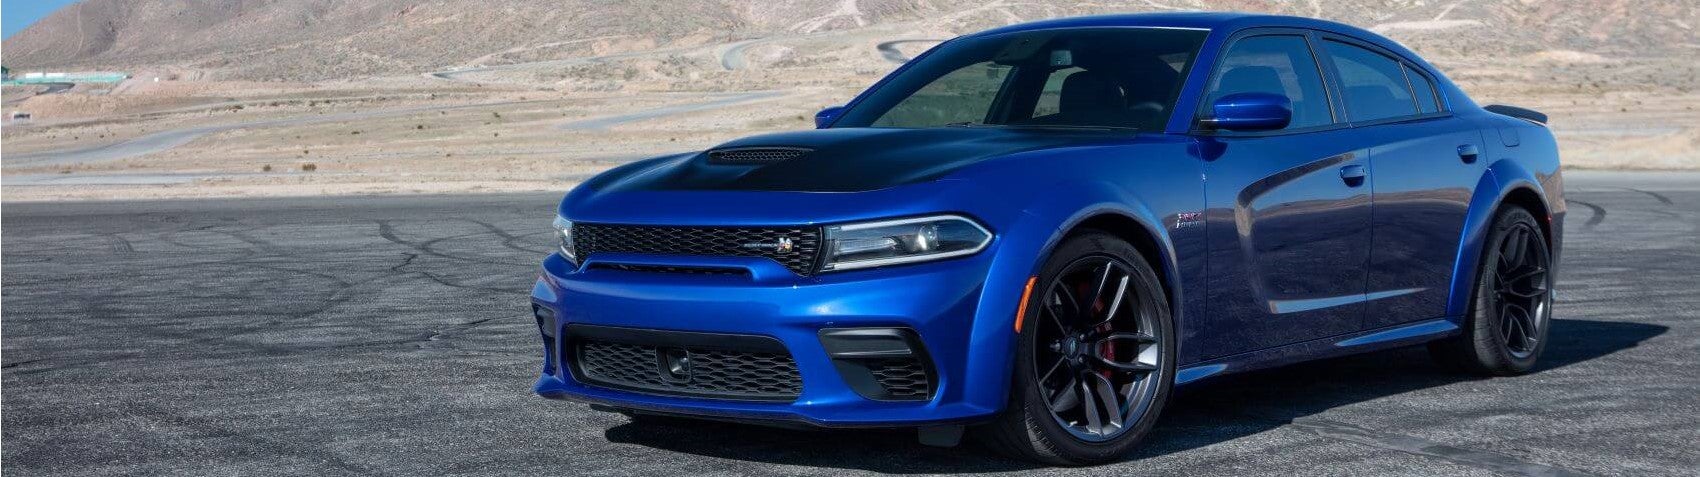 Blue Charger Snipped